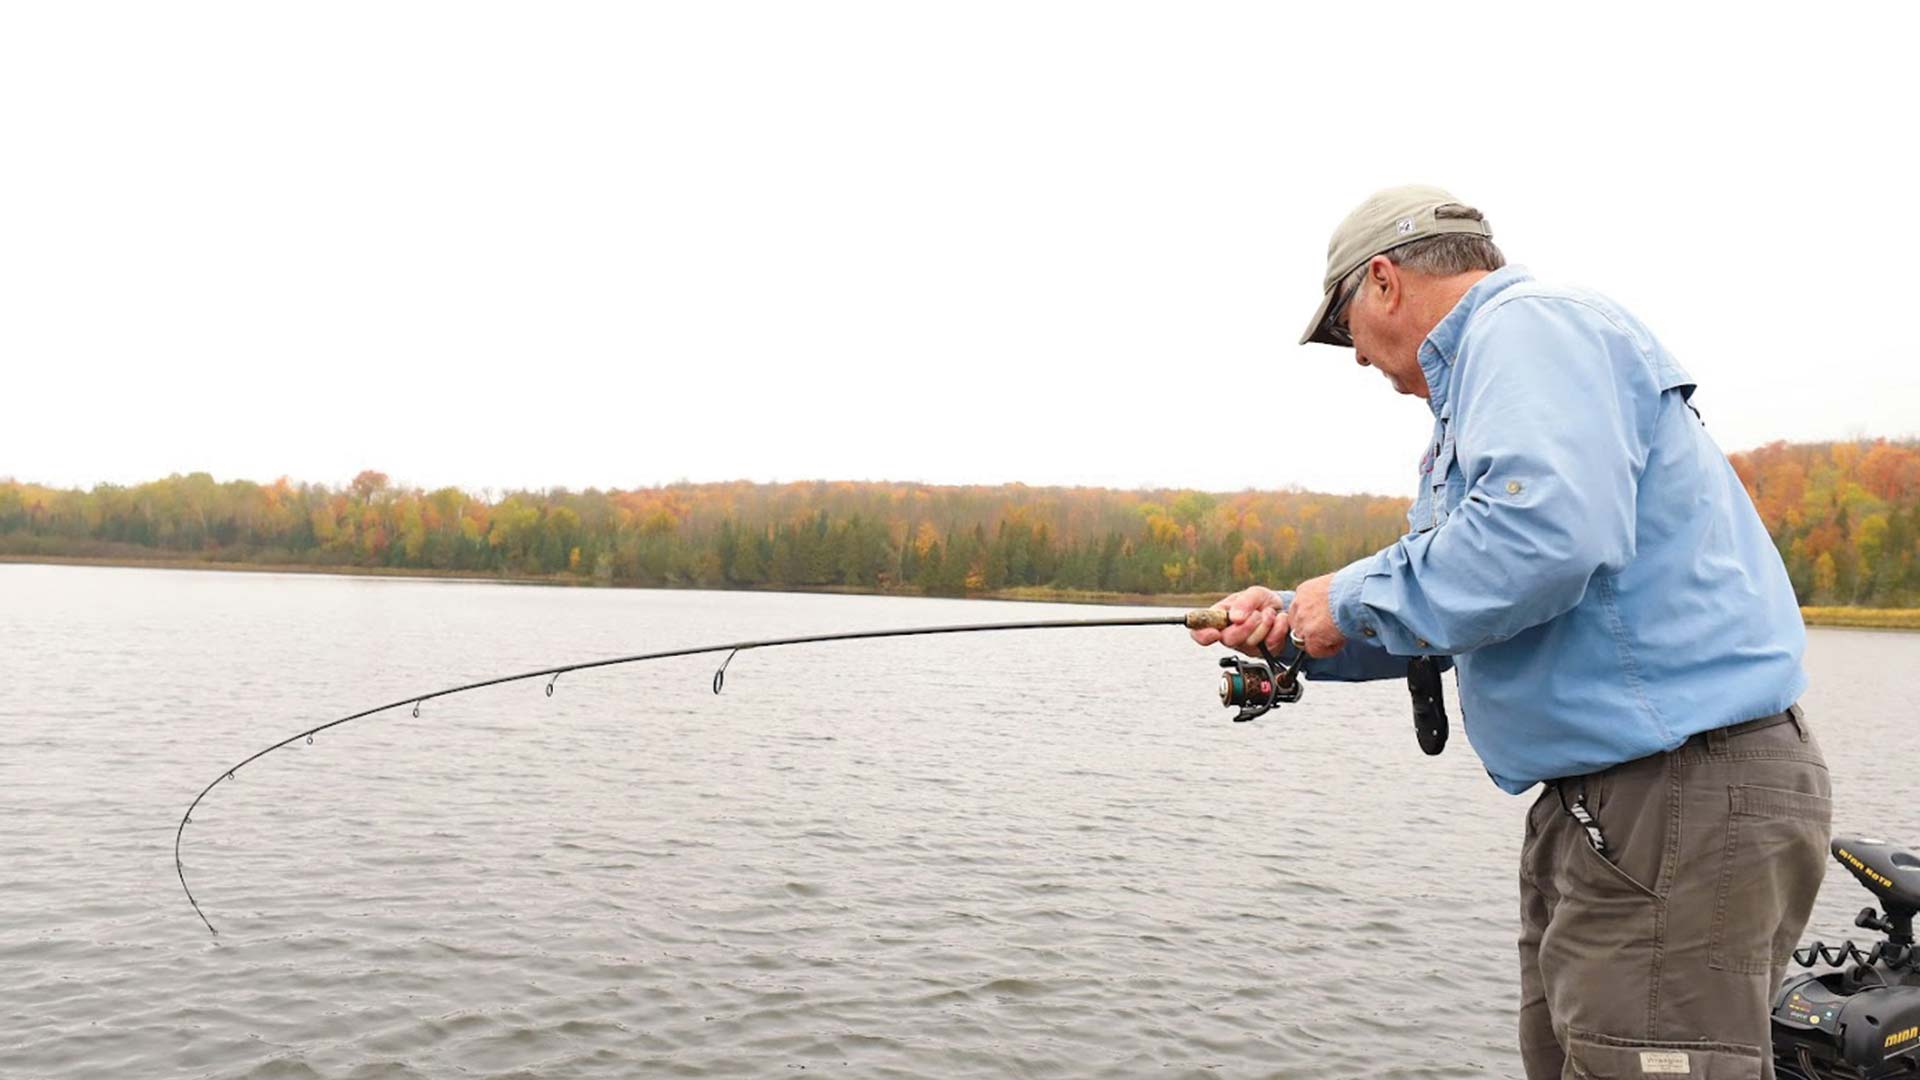 Reeling in a catch at Round Lake during fall